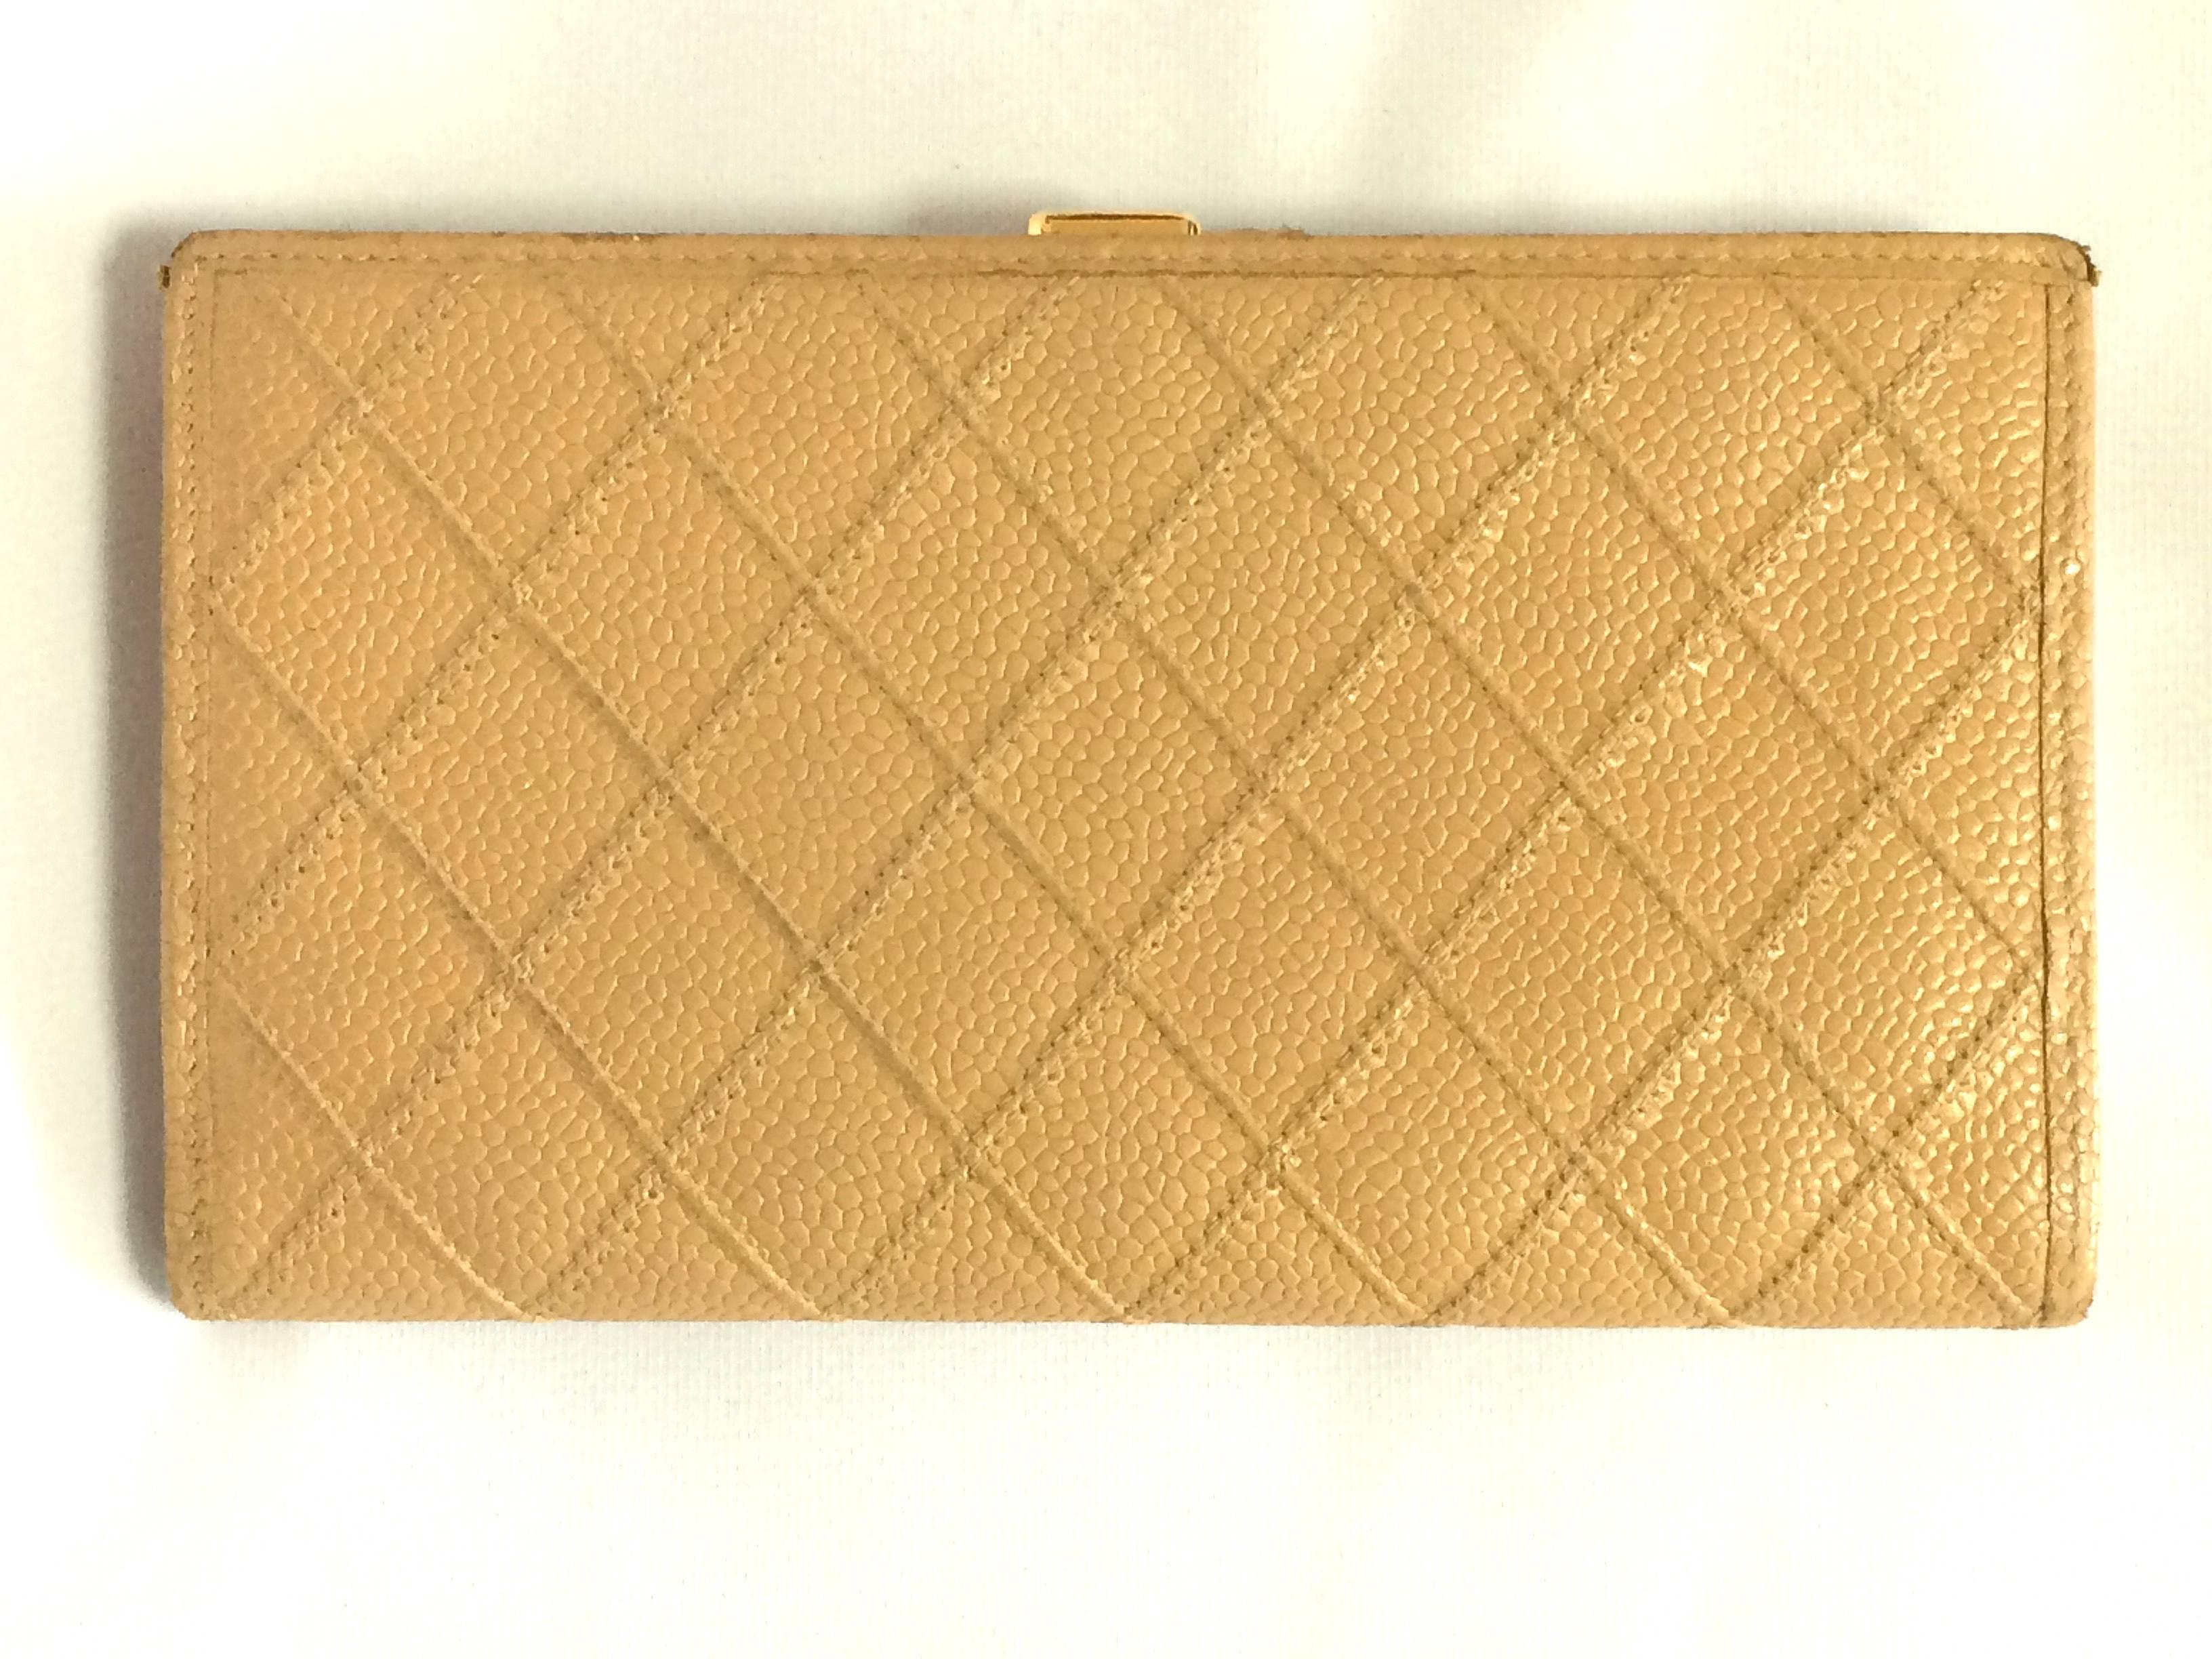 1990s. Vintage CHANEL beige caviar leather wallet with gold tone CC motif. Classic color.

This is a CHANEL vintage wallet in classic beige color caviar skin from the 90's. 
Very sophisticated looking and something that would never go out of